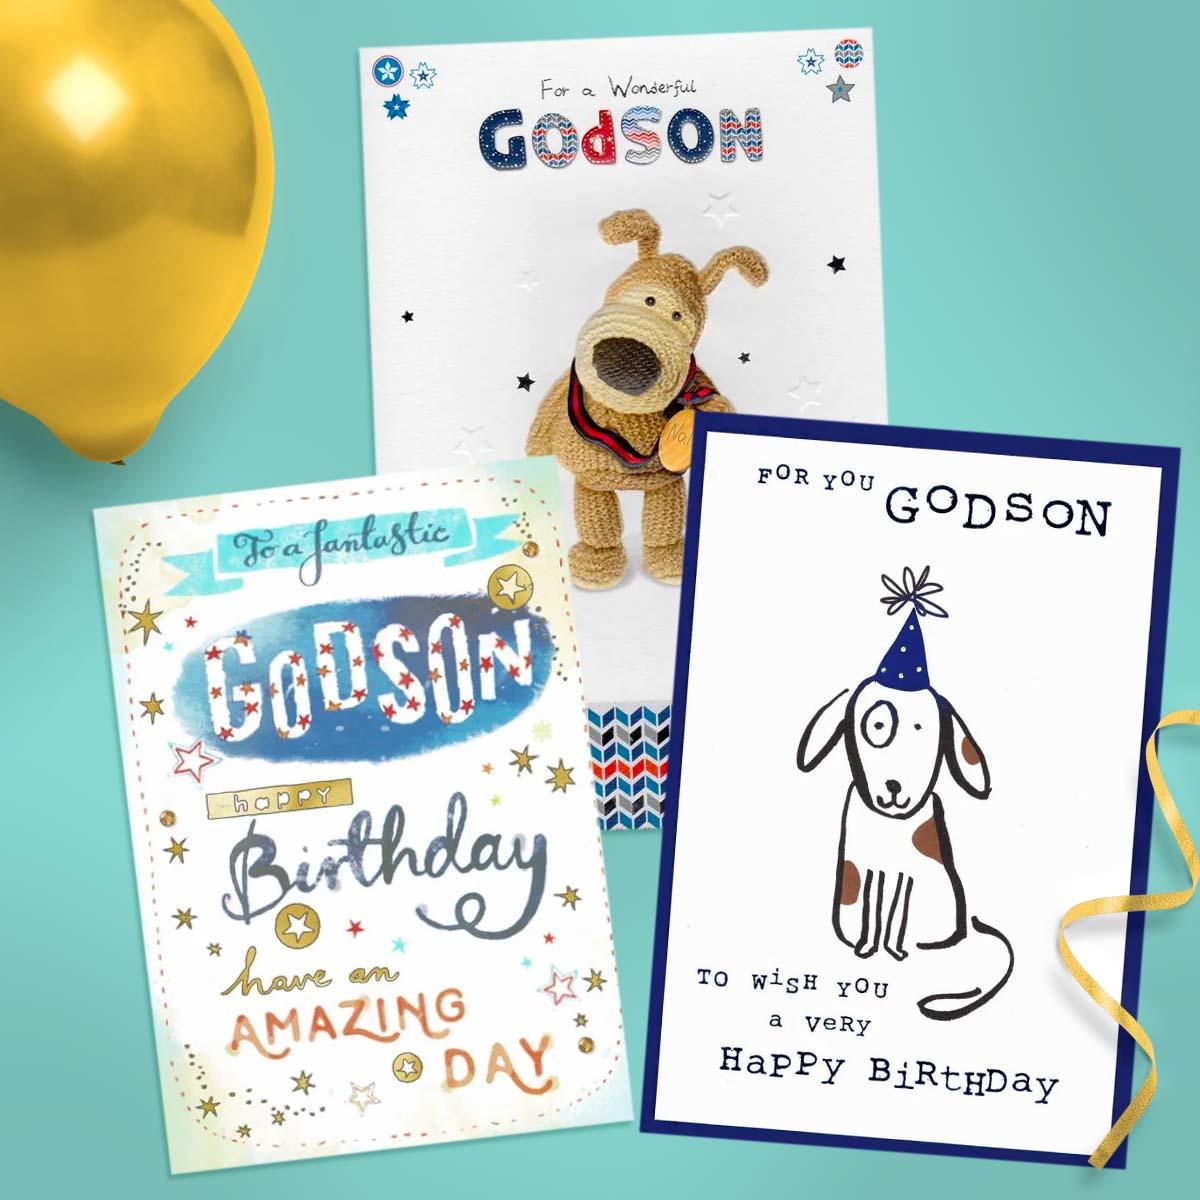 A Selection Of Cards To Show The Depth Of Range In Godson Birthday Card Section